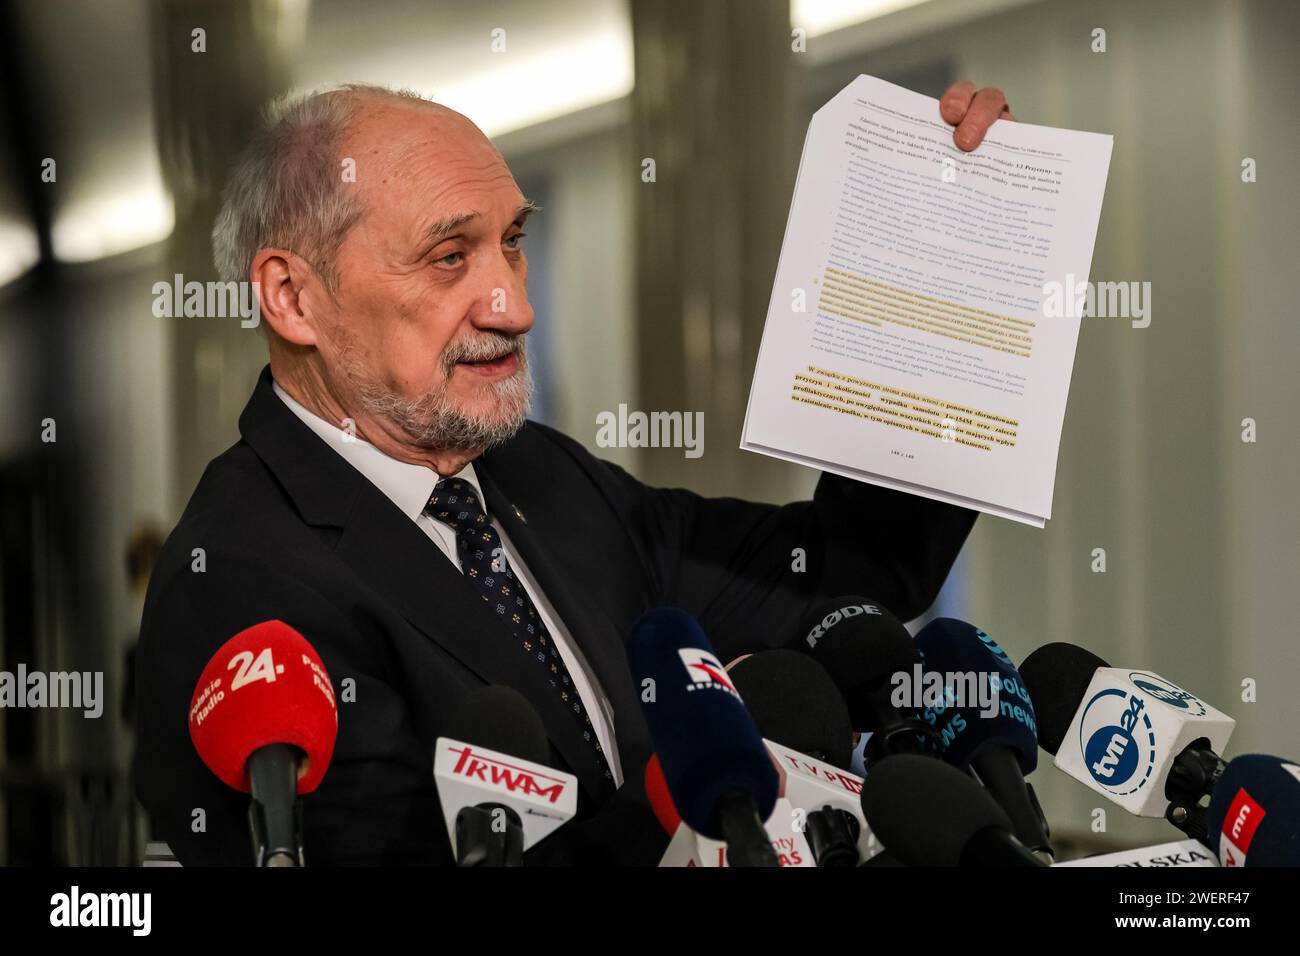 Warsaw, Poland, January 26, 2024. Antoni Macierewicz, former Minister of Defence of Poland talks to press during the 4th session of Polish Parliament that takes place amid chaos created by legal disagreement with the previous government. Current government took over the power in Poland on December 13 2023, taking over from the Law and Justice far-right political party, which has ruled for 8 years. Both sides accuse each other of unconstitutional acts, and two de facto legal systems are present in the country. Credit: Dominika Zarzycka/ Alamy Live News Stock Photo